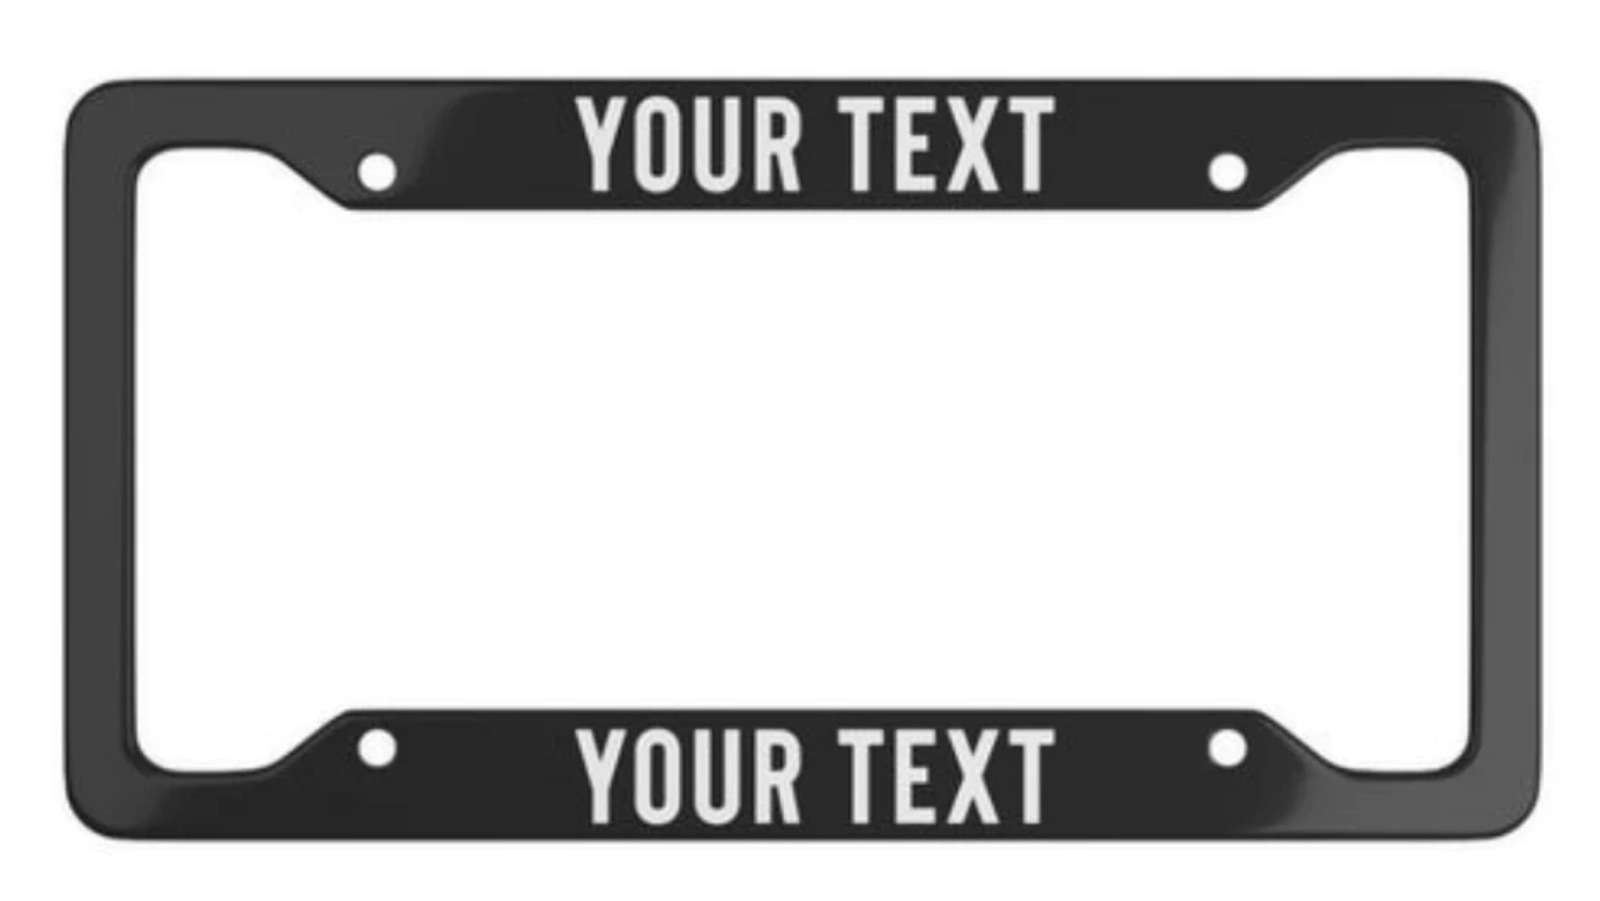 Personalize your own METAL License Plate Frame